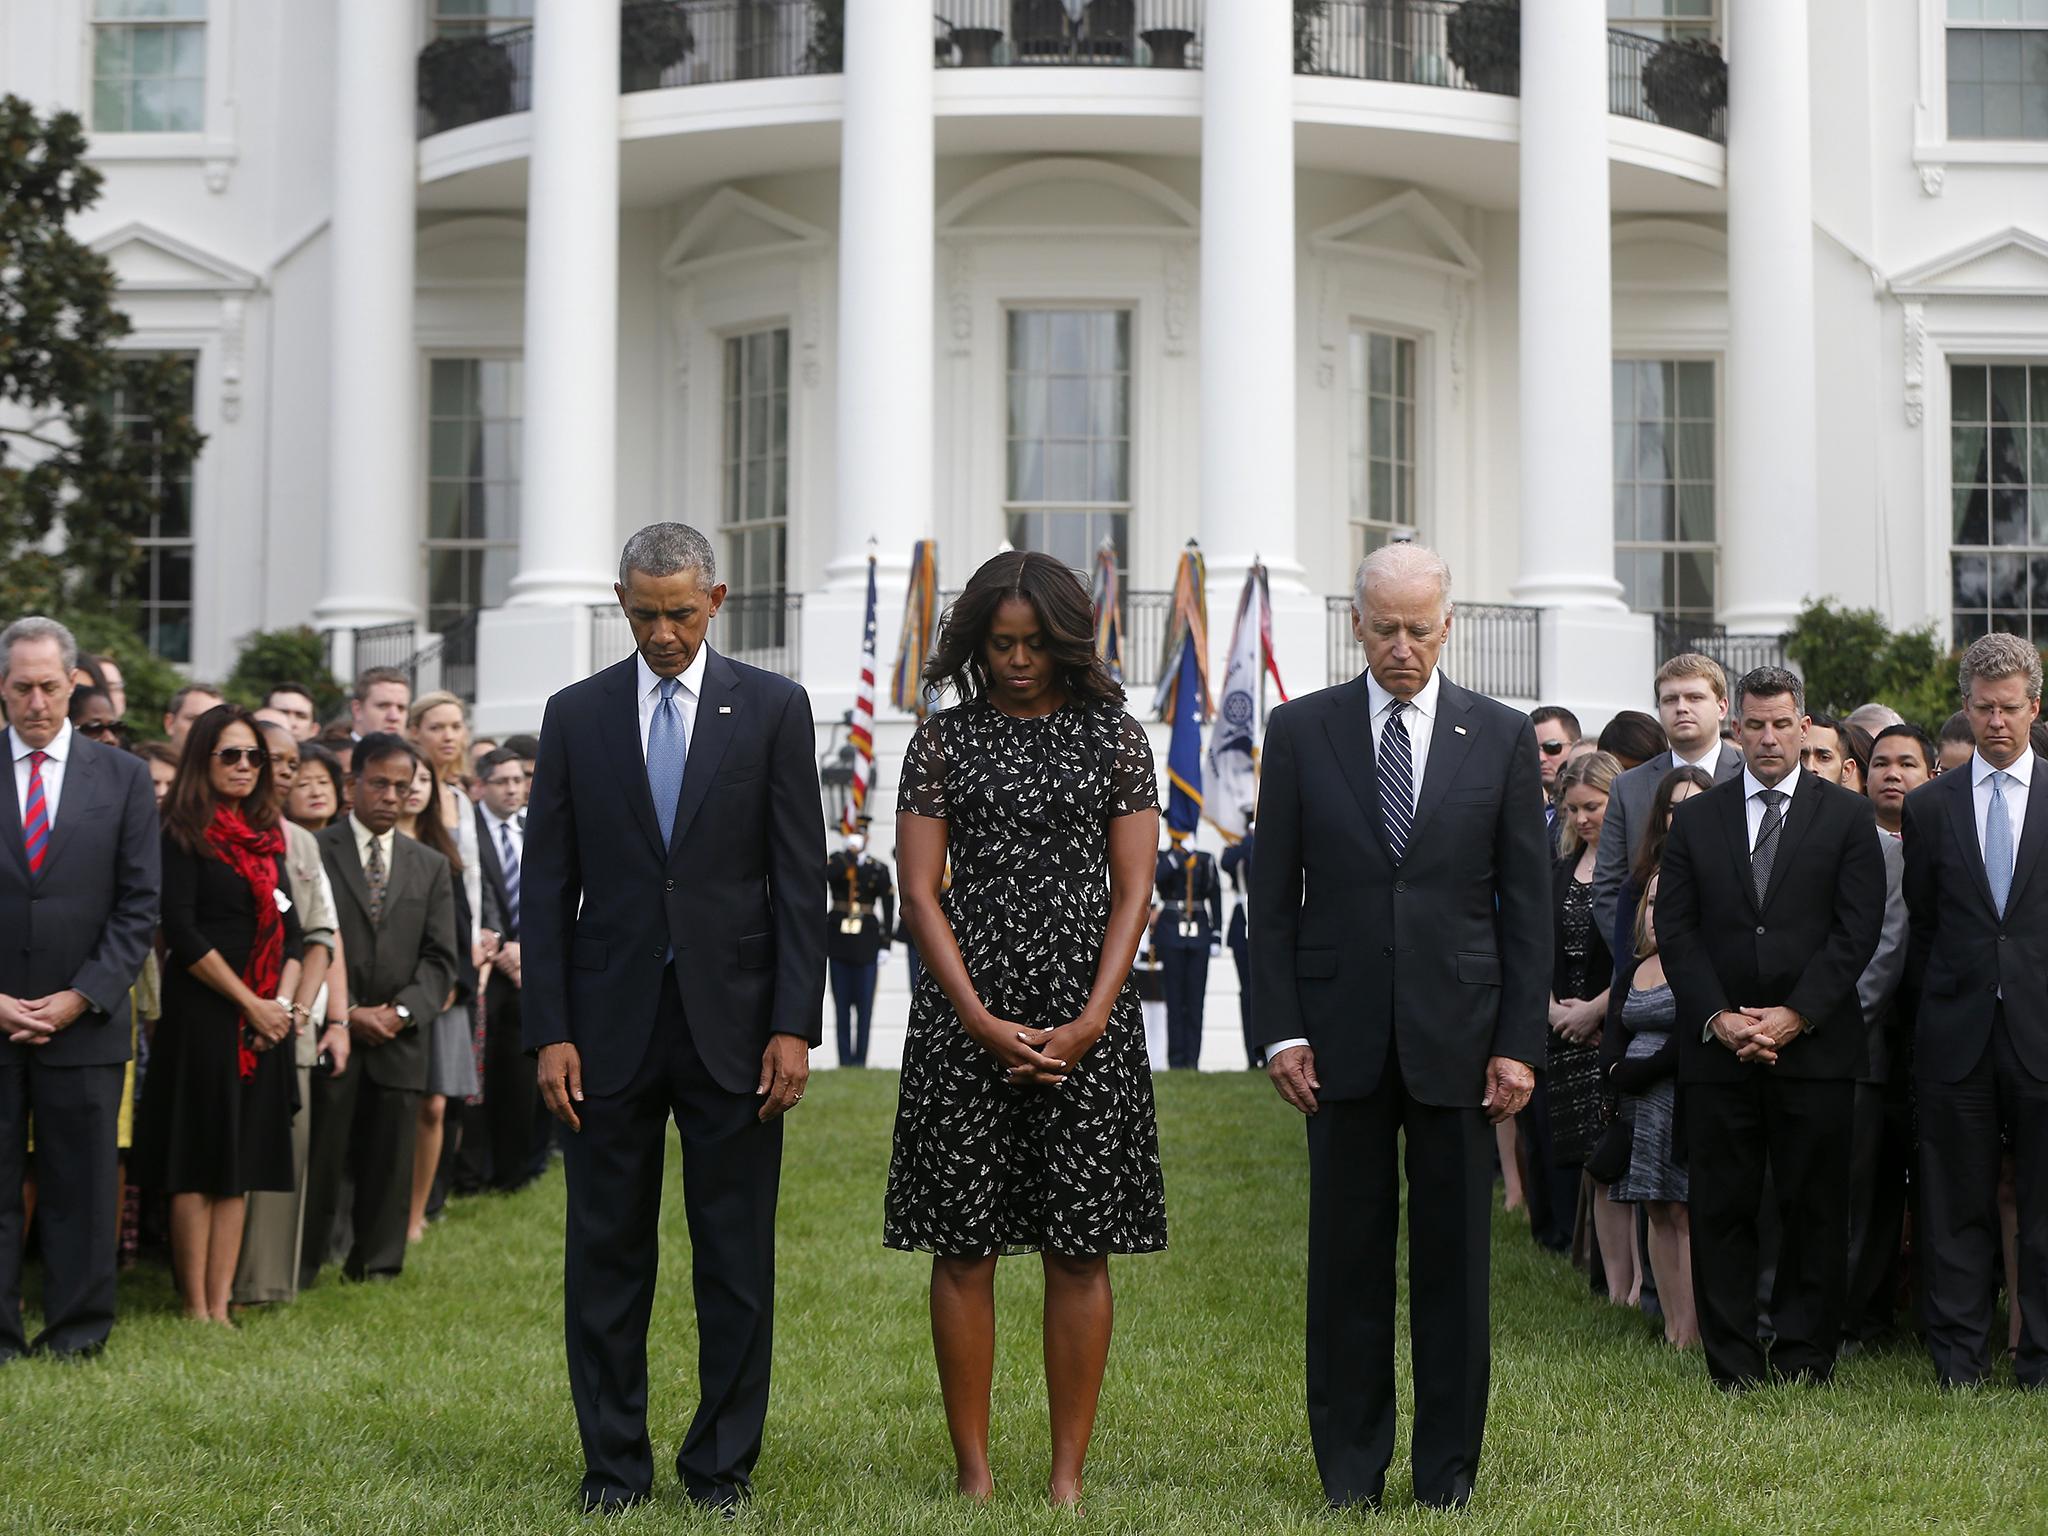 Barack and Michelle Obama and Vice-President Joe Biden observing a moment of silence outside the White House to mark the 13th anniversary of the 9/11 attacks